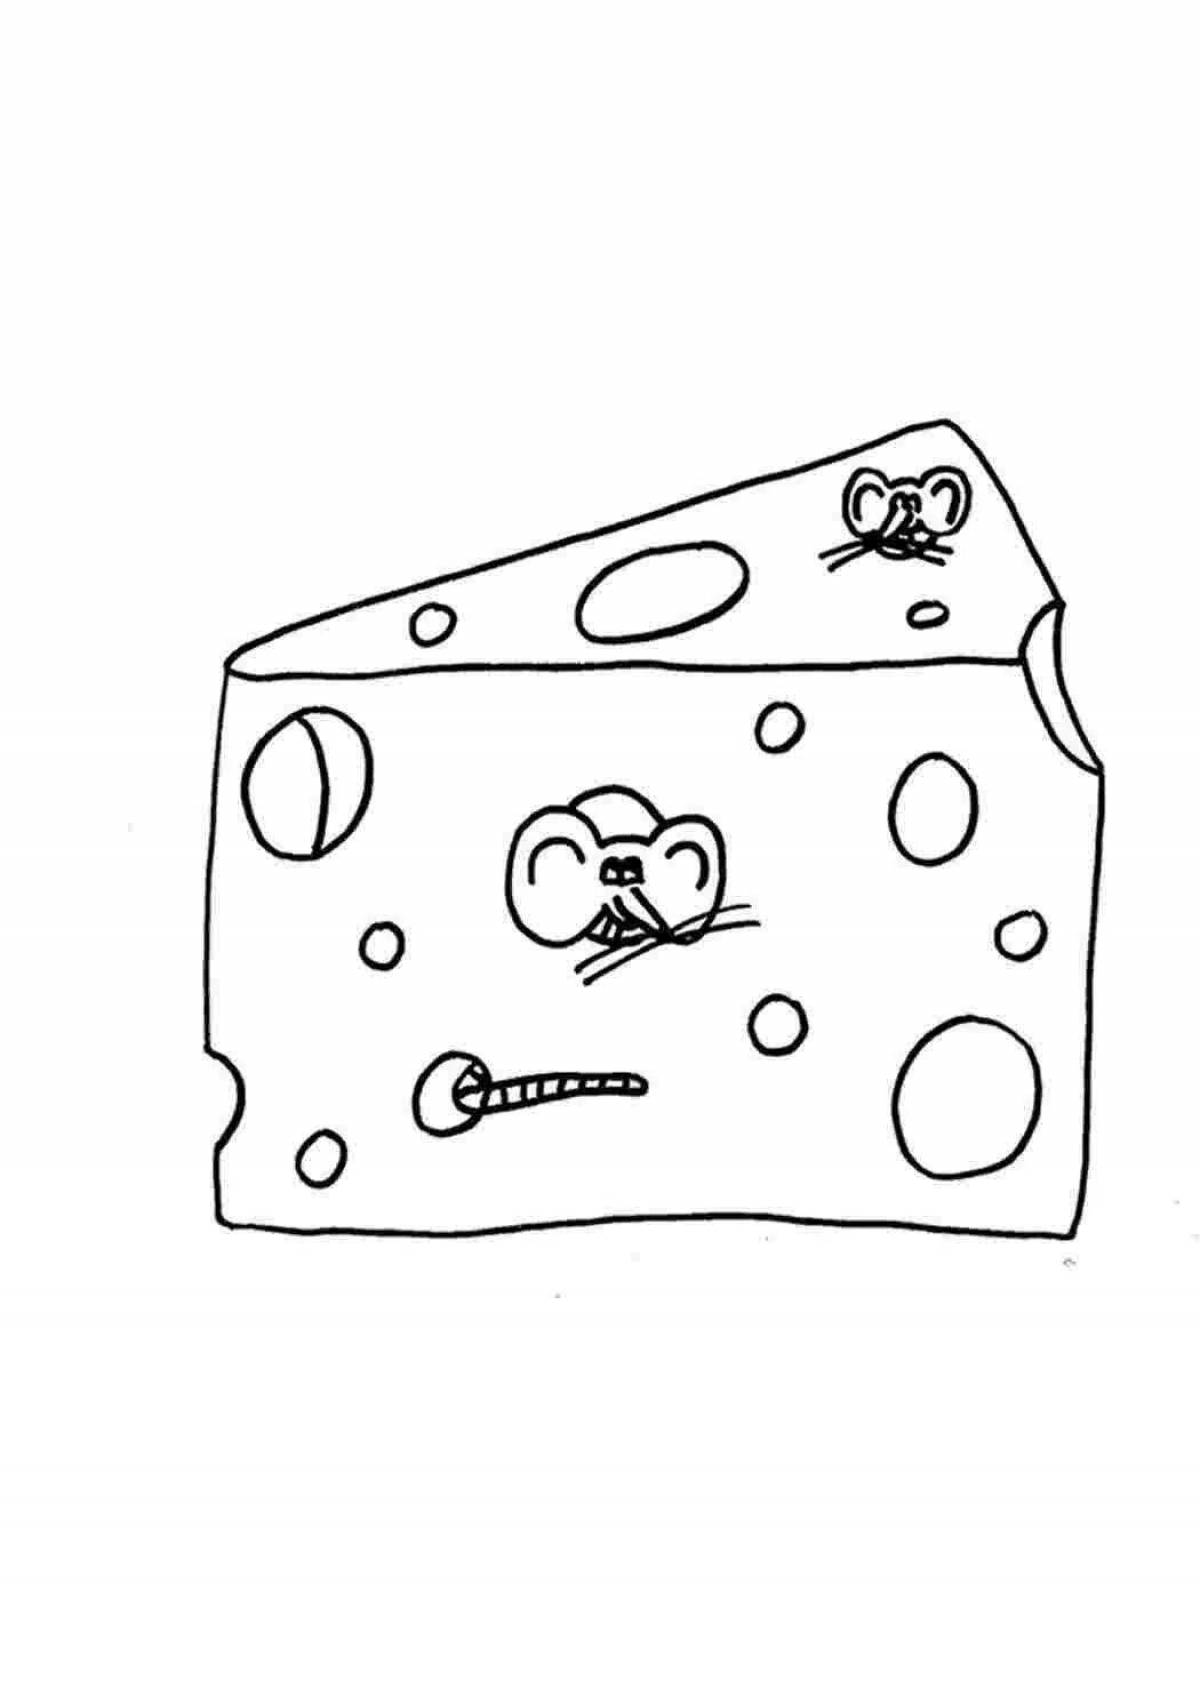 Refined cheese coloring page